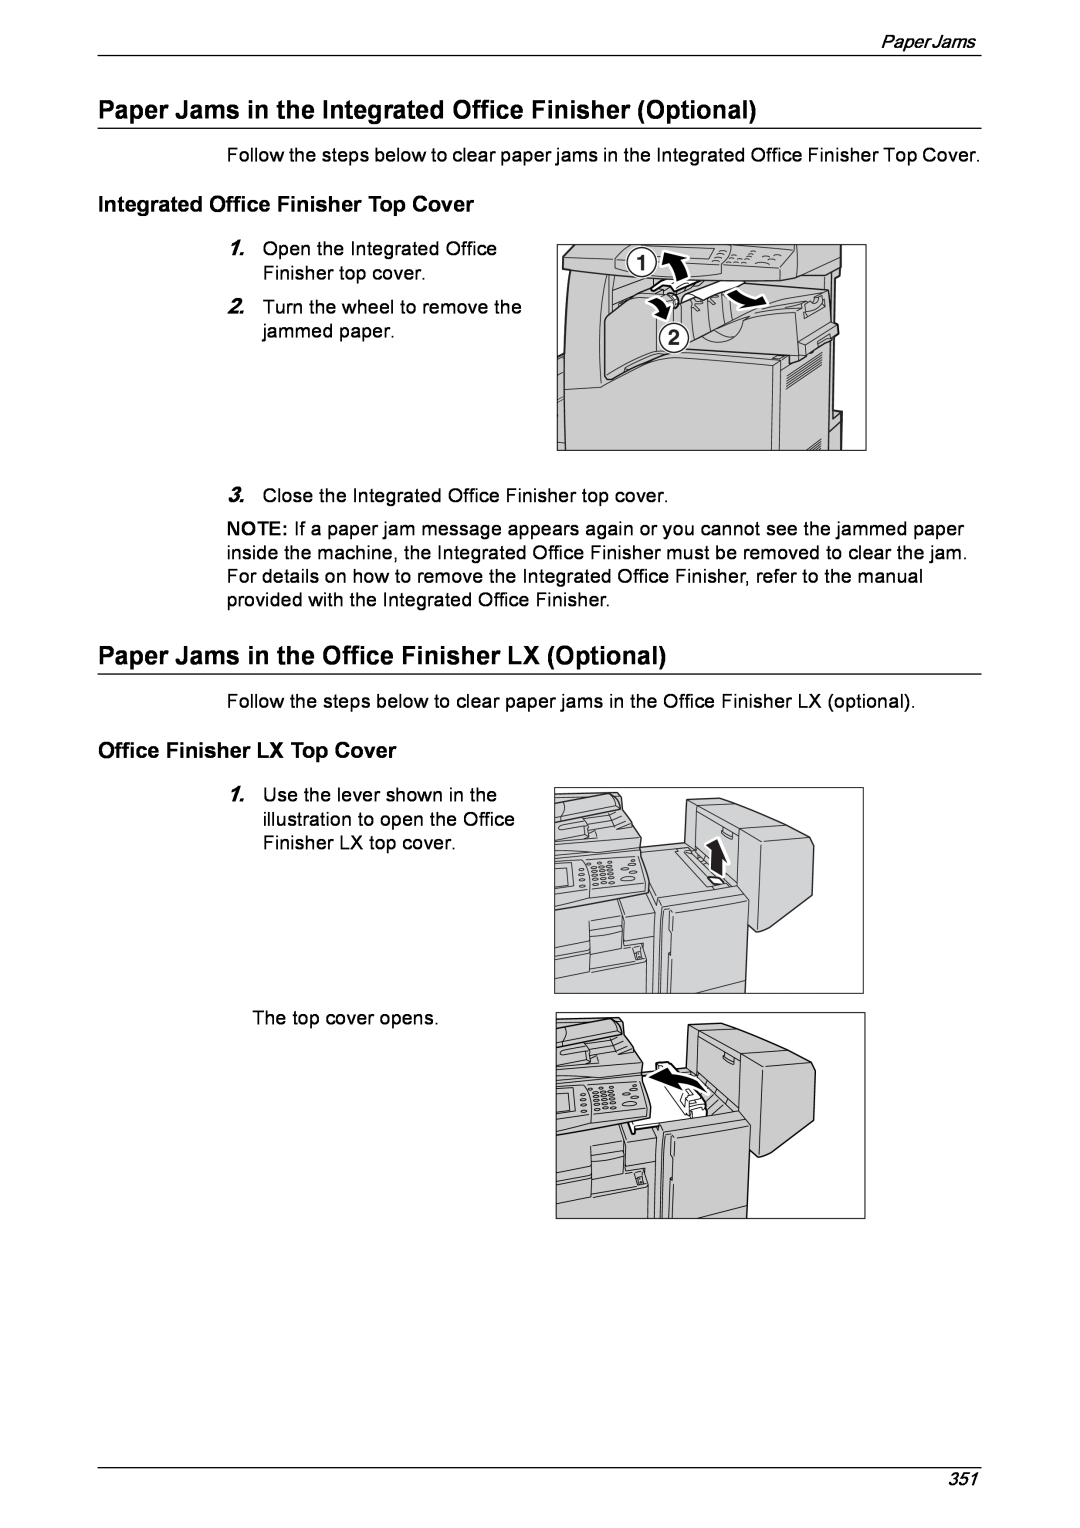 Xerox 5222 manual Paper Jams in the Office Finisher LX Optional, Integrated Office Finisher Top Cover 